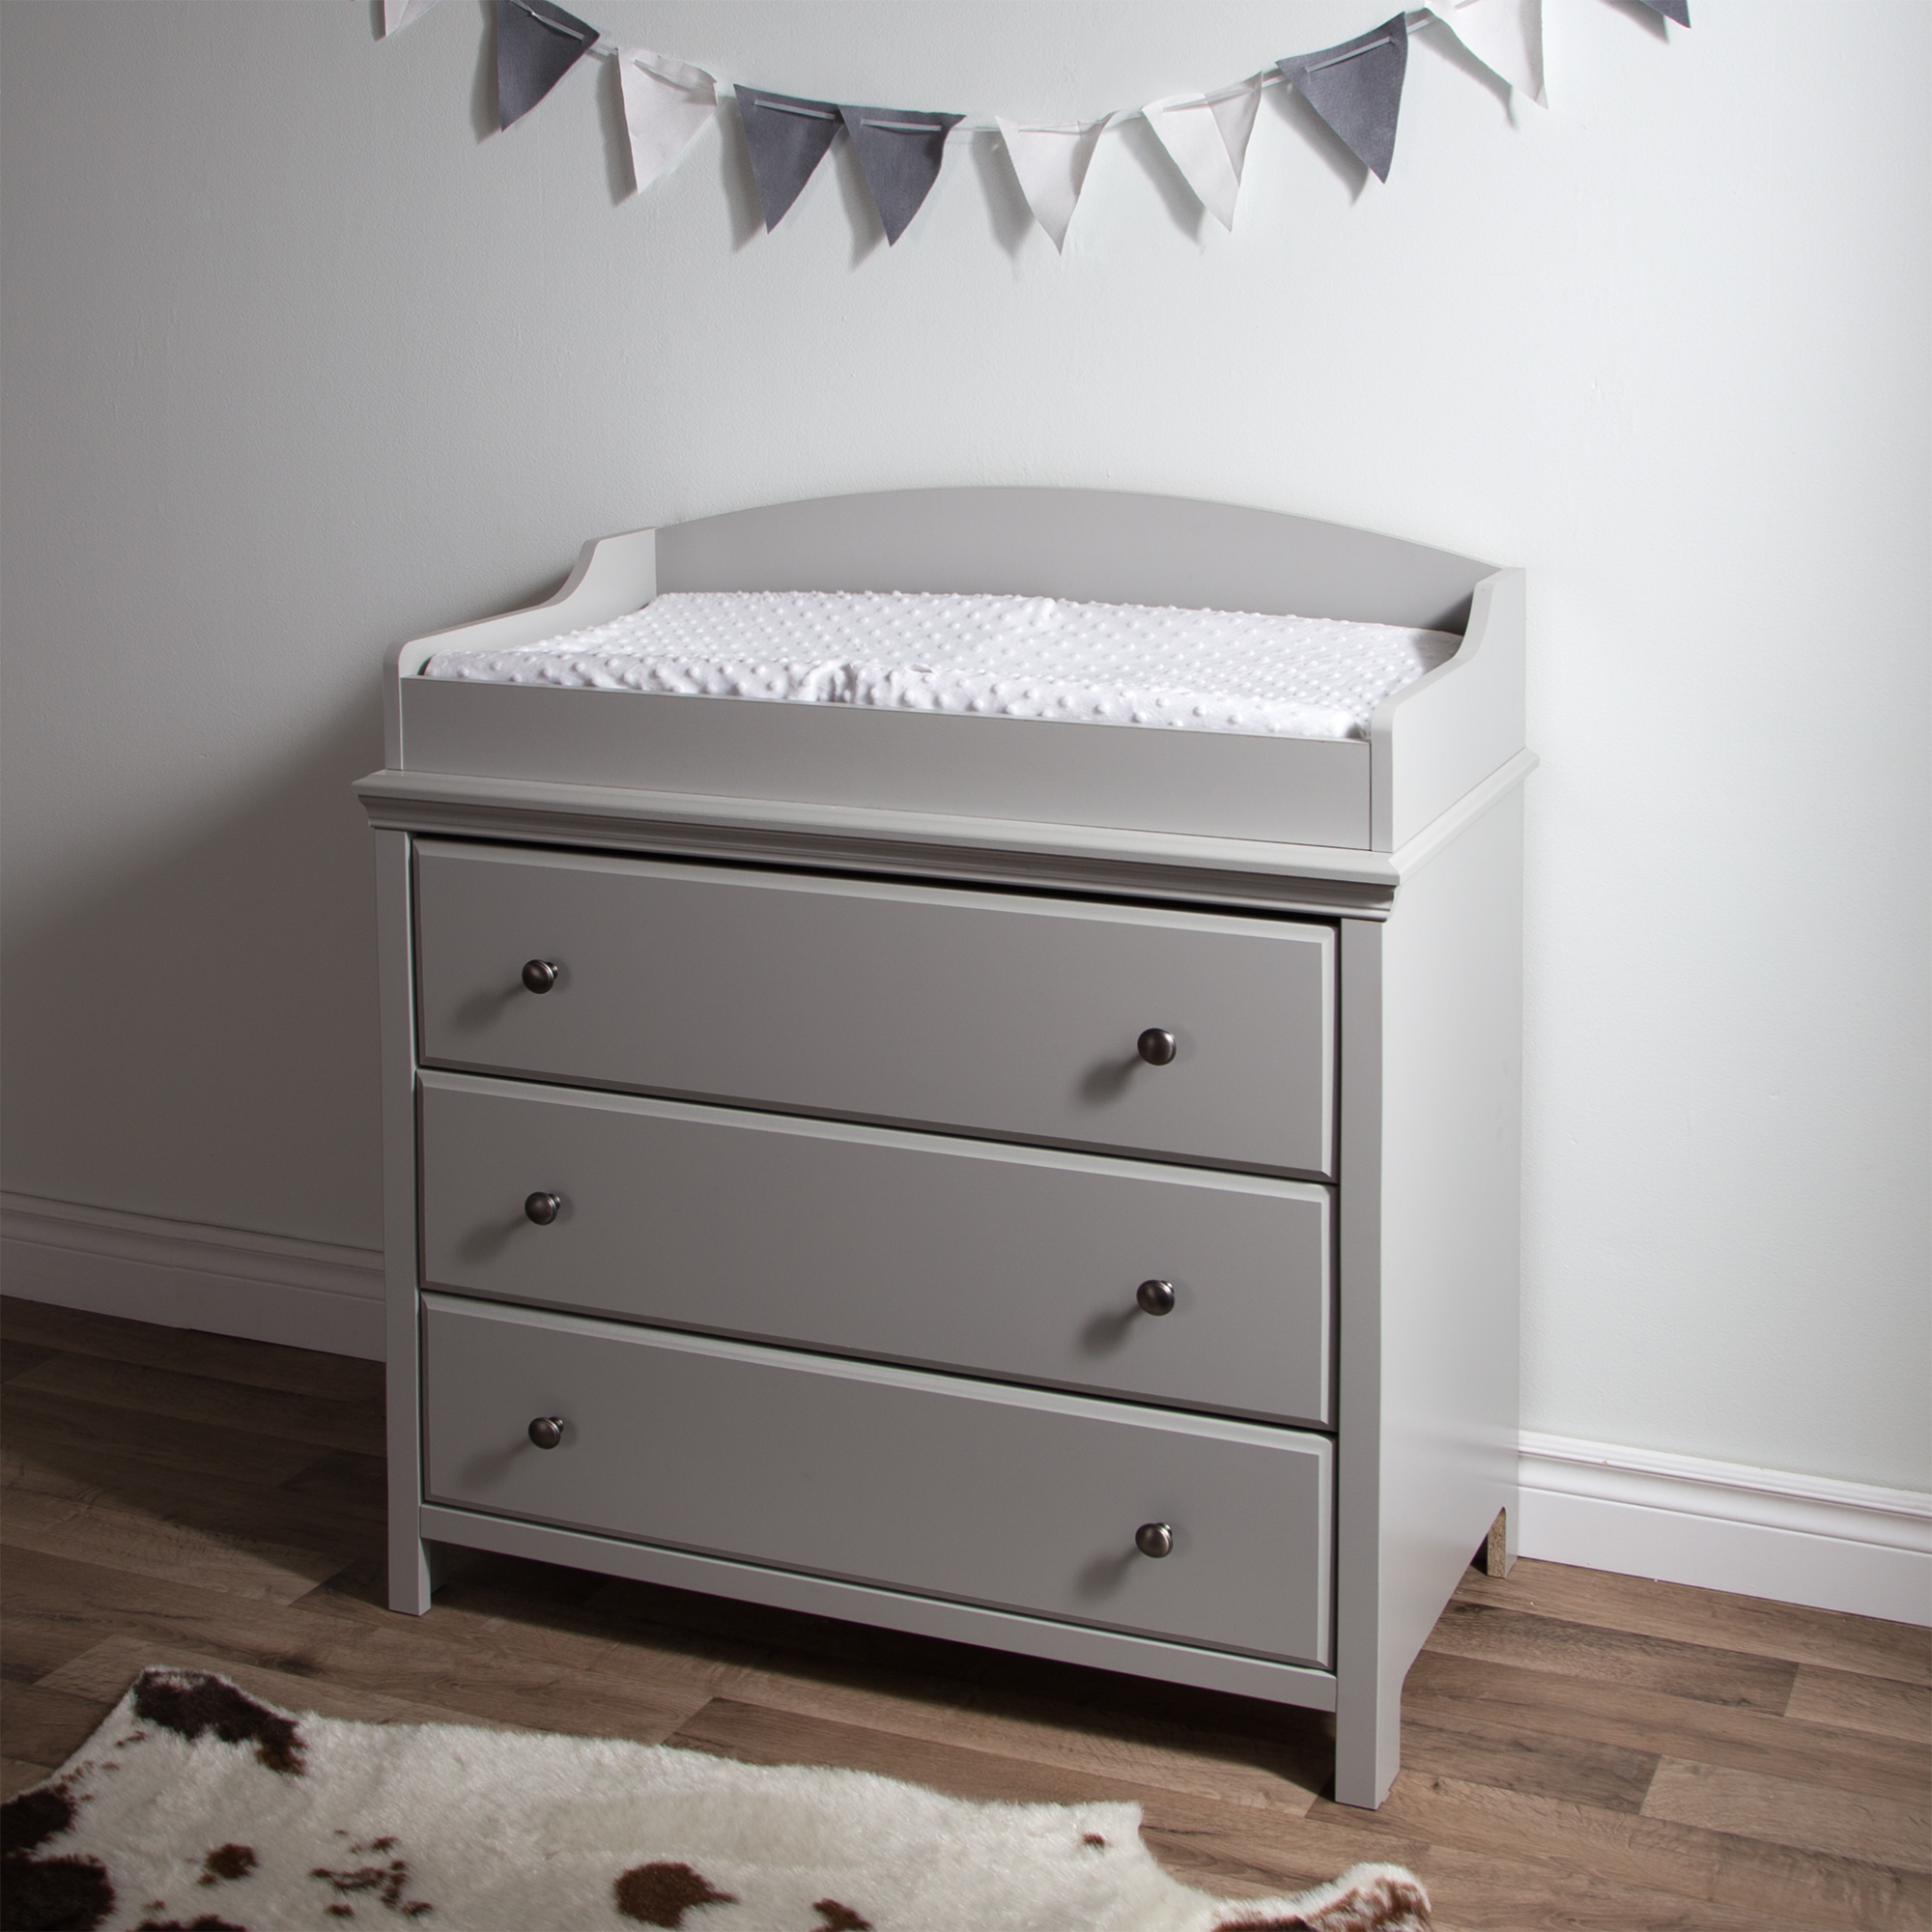 South Shore Cotton Candy Changing Table with Drawers- Soft Gray